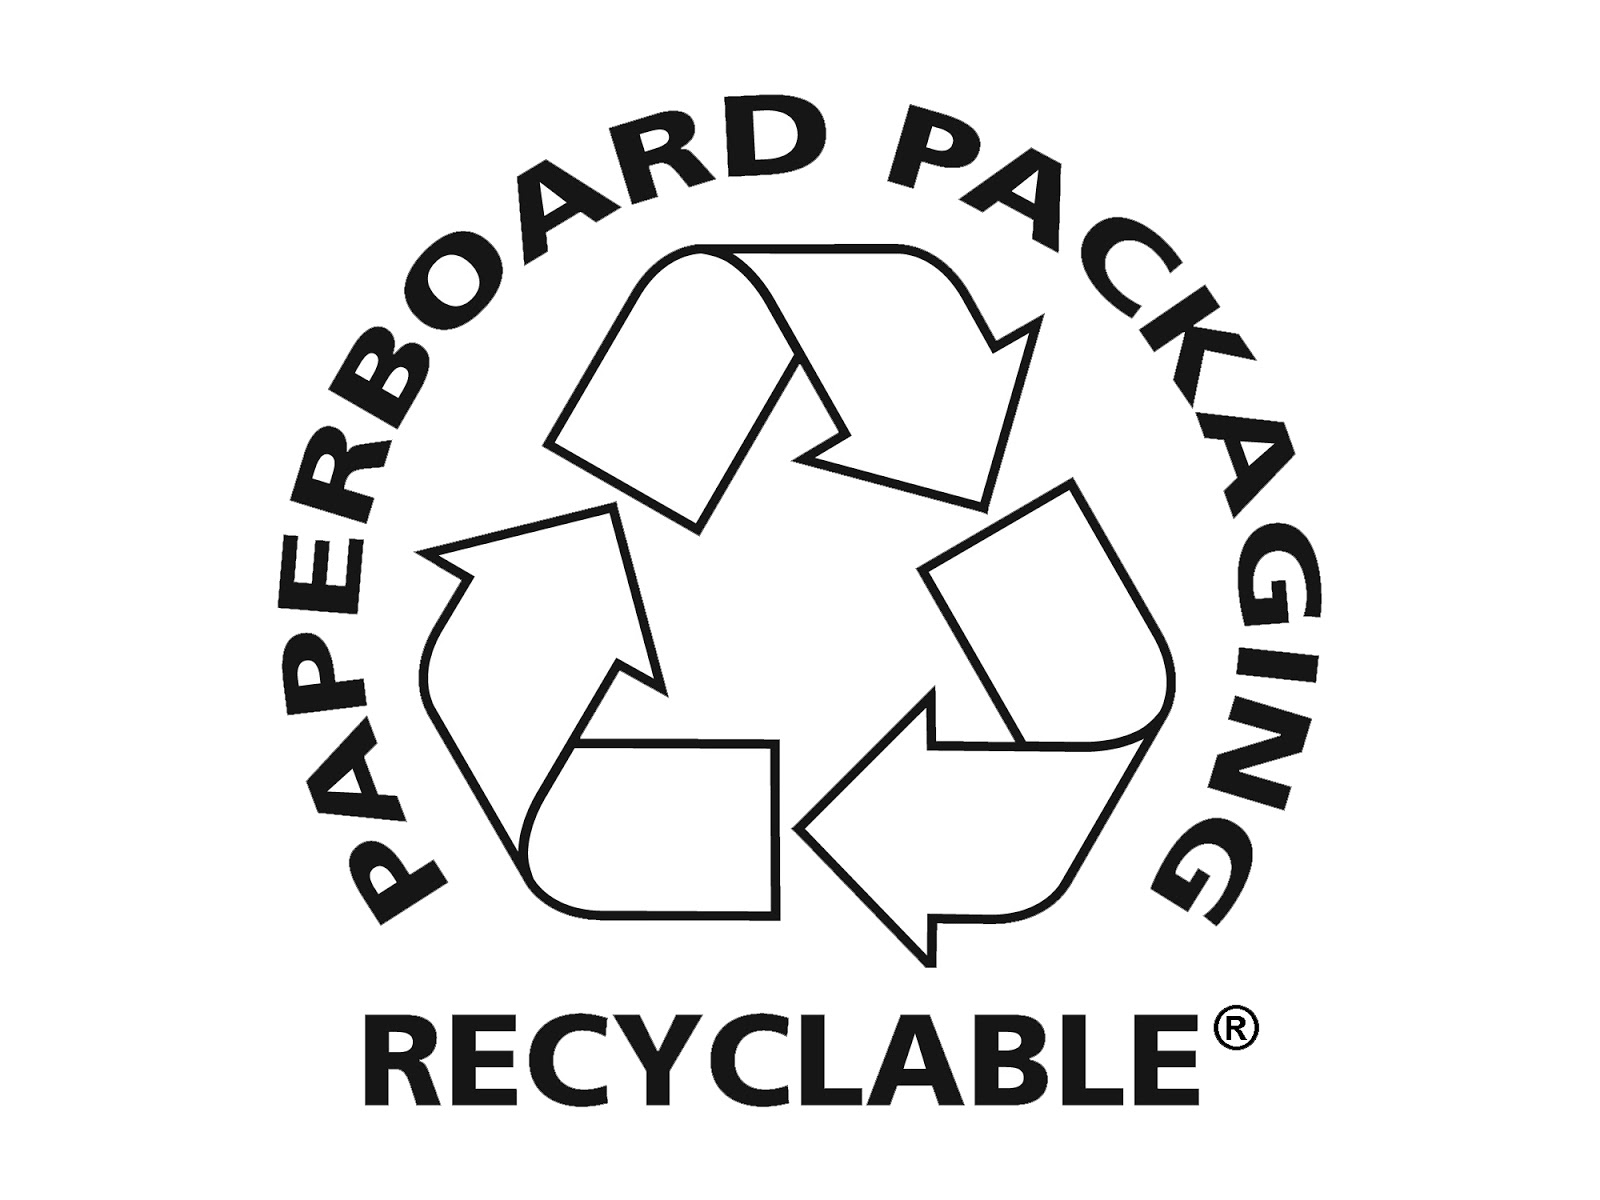 Diamond Packaging: How to Use the Recyclable Packaging Logo in Your